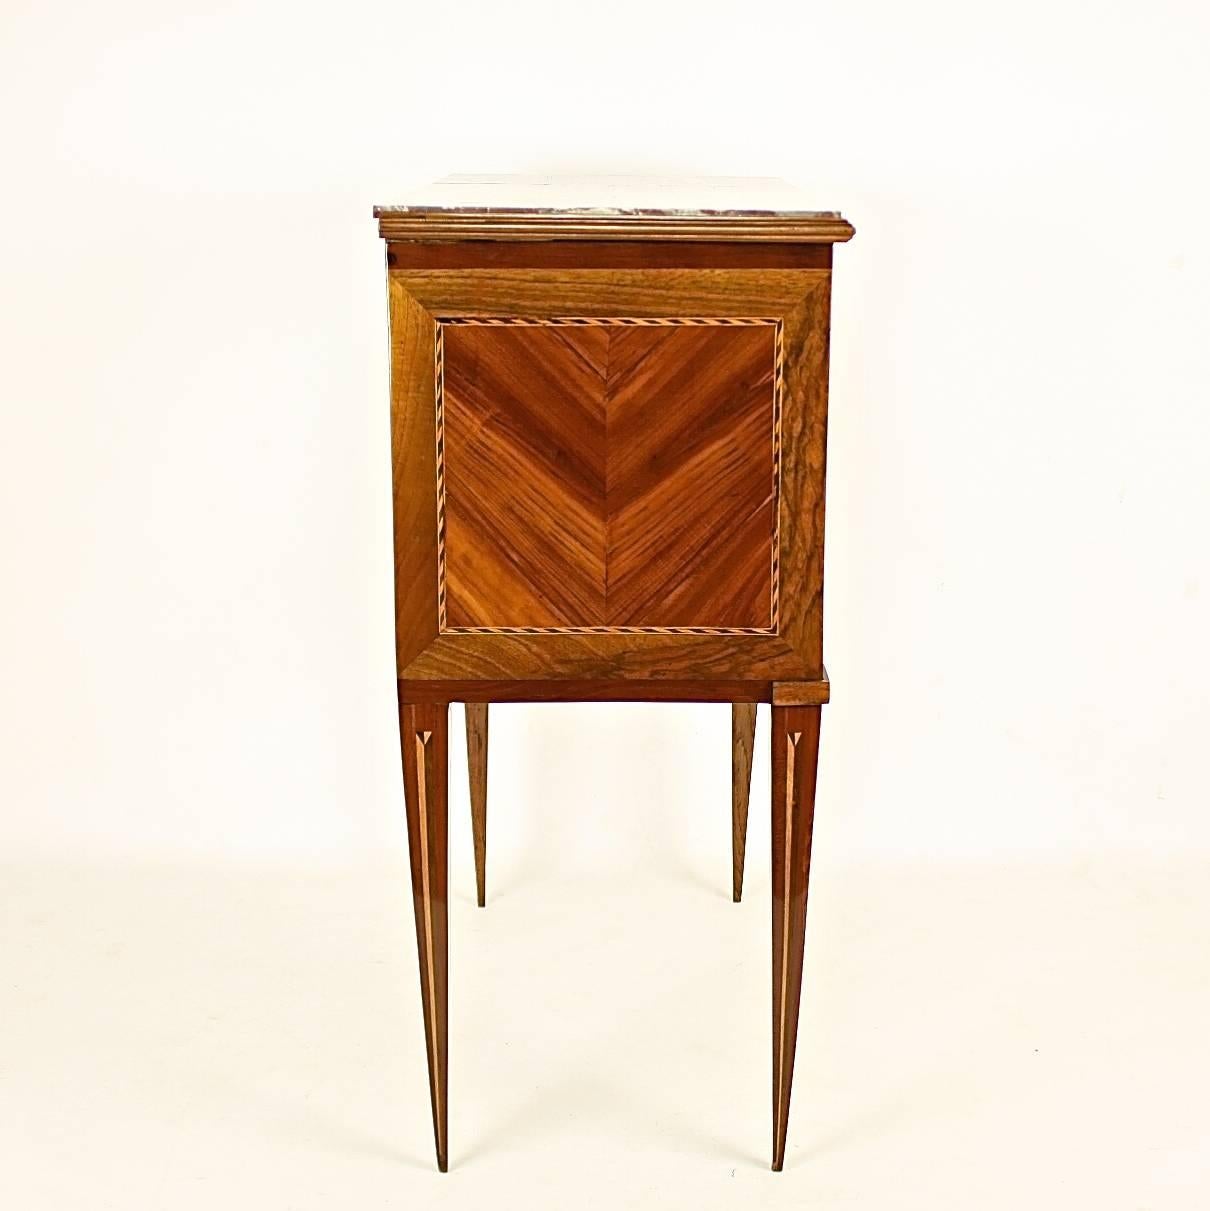 Marquetry Late 18th Century Louis XVI Side Table or 'Table Chiffonière'